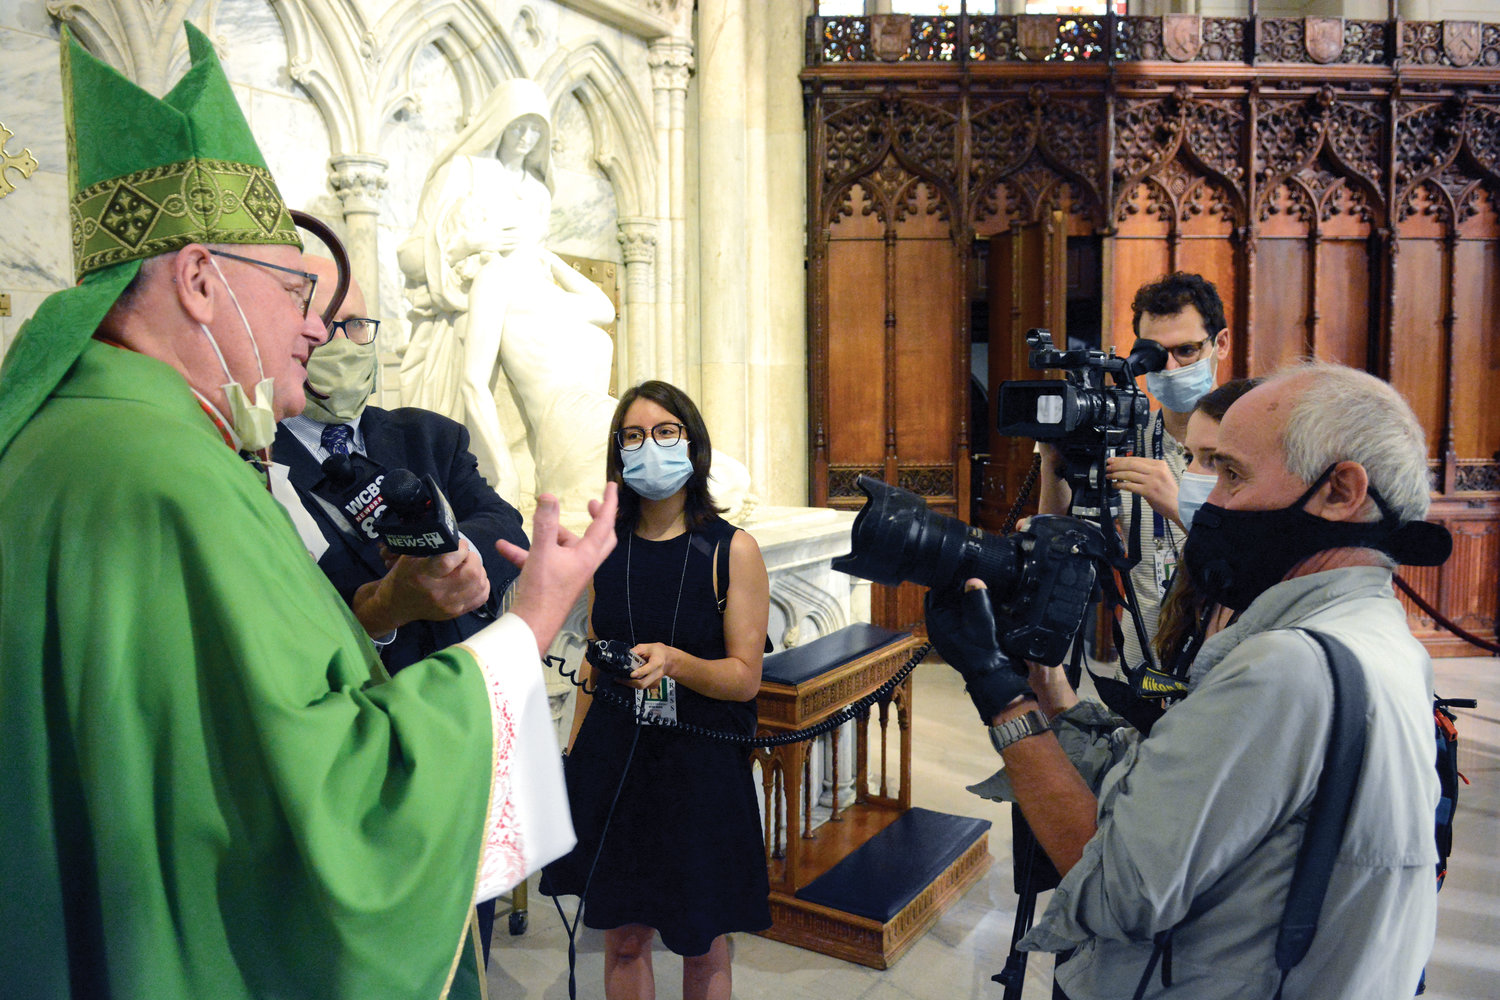 Cardinal Dolan addresses the press after serving as principal celebrant at the first public Sunday Mass in the cathedral since the mid-March cancellation of public assemblies in churches across the archdiocese amid the coronavirus pandemic.